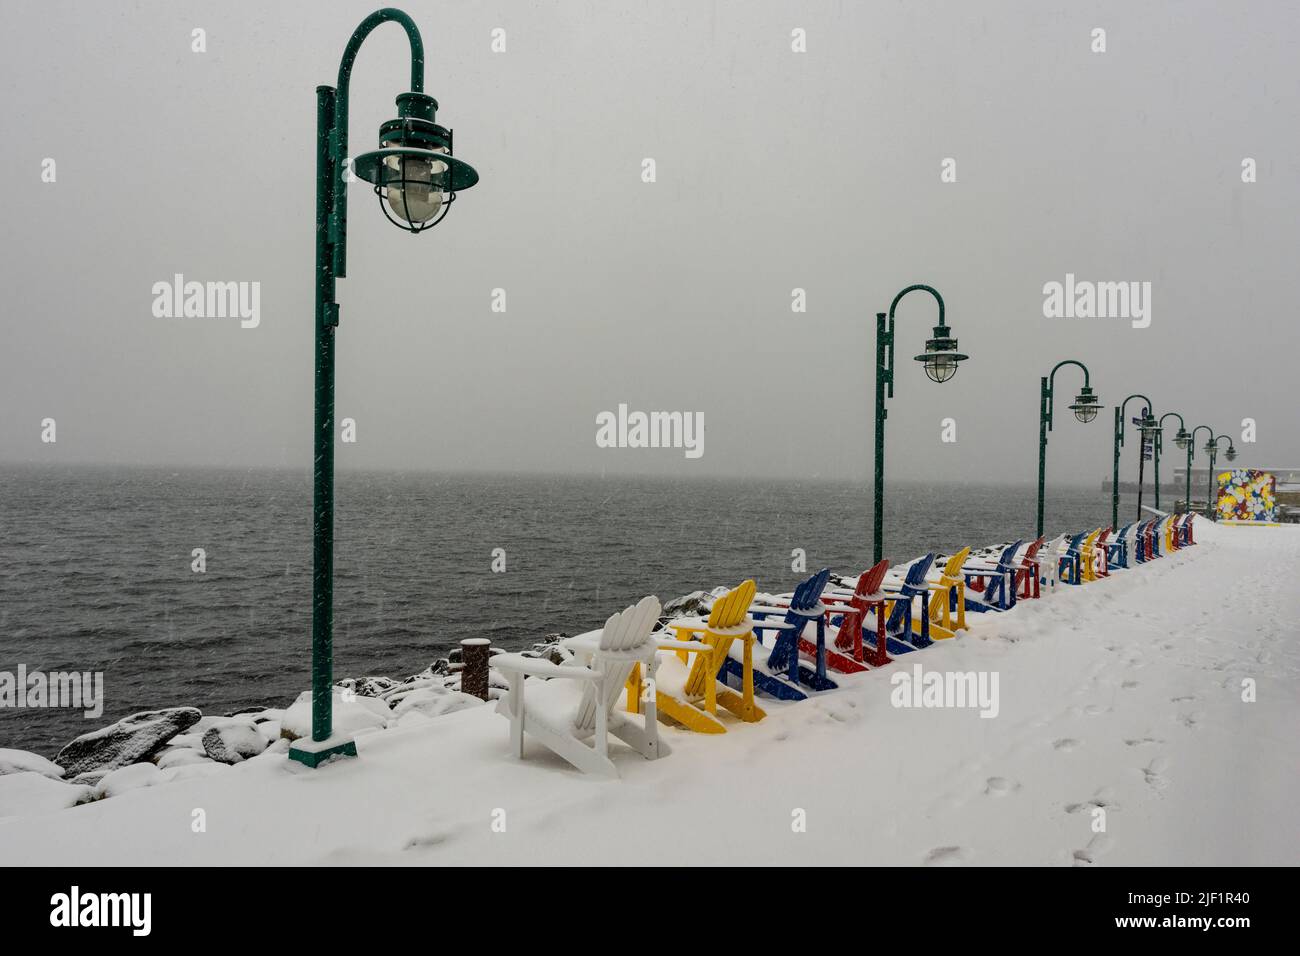 Colourful row of adirondack chairs in snow on the waterfront boardwalk in Halifax, Nova Scotia, Canada. Stock Photo